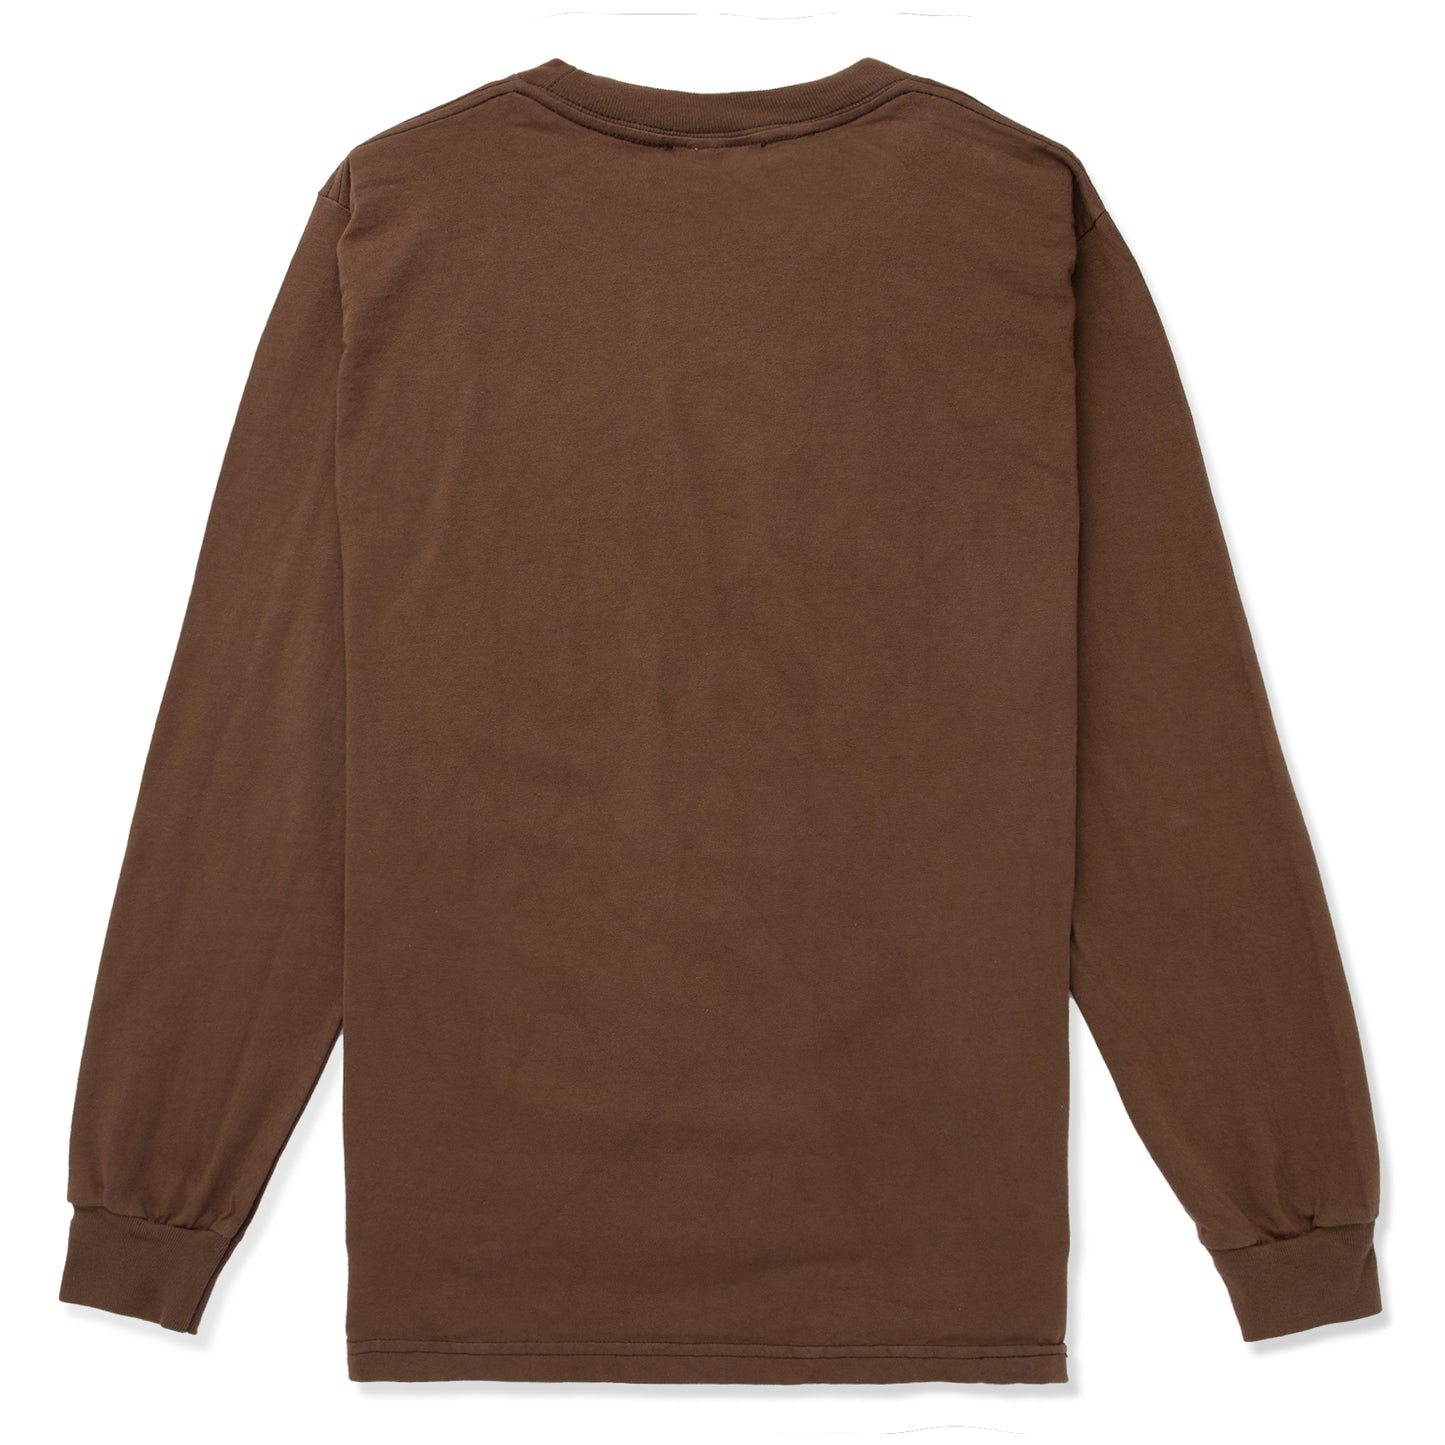 Cliff Problem Child Long Sleeve Shirt (Downtown Brown)